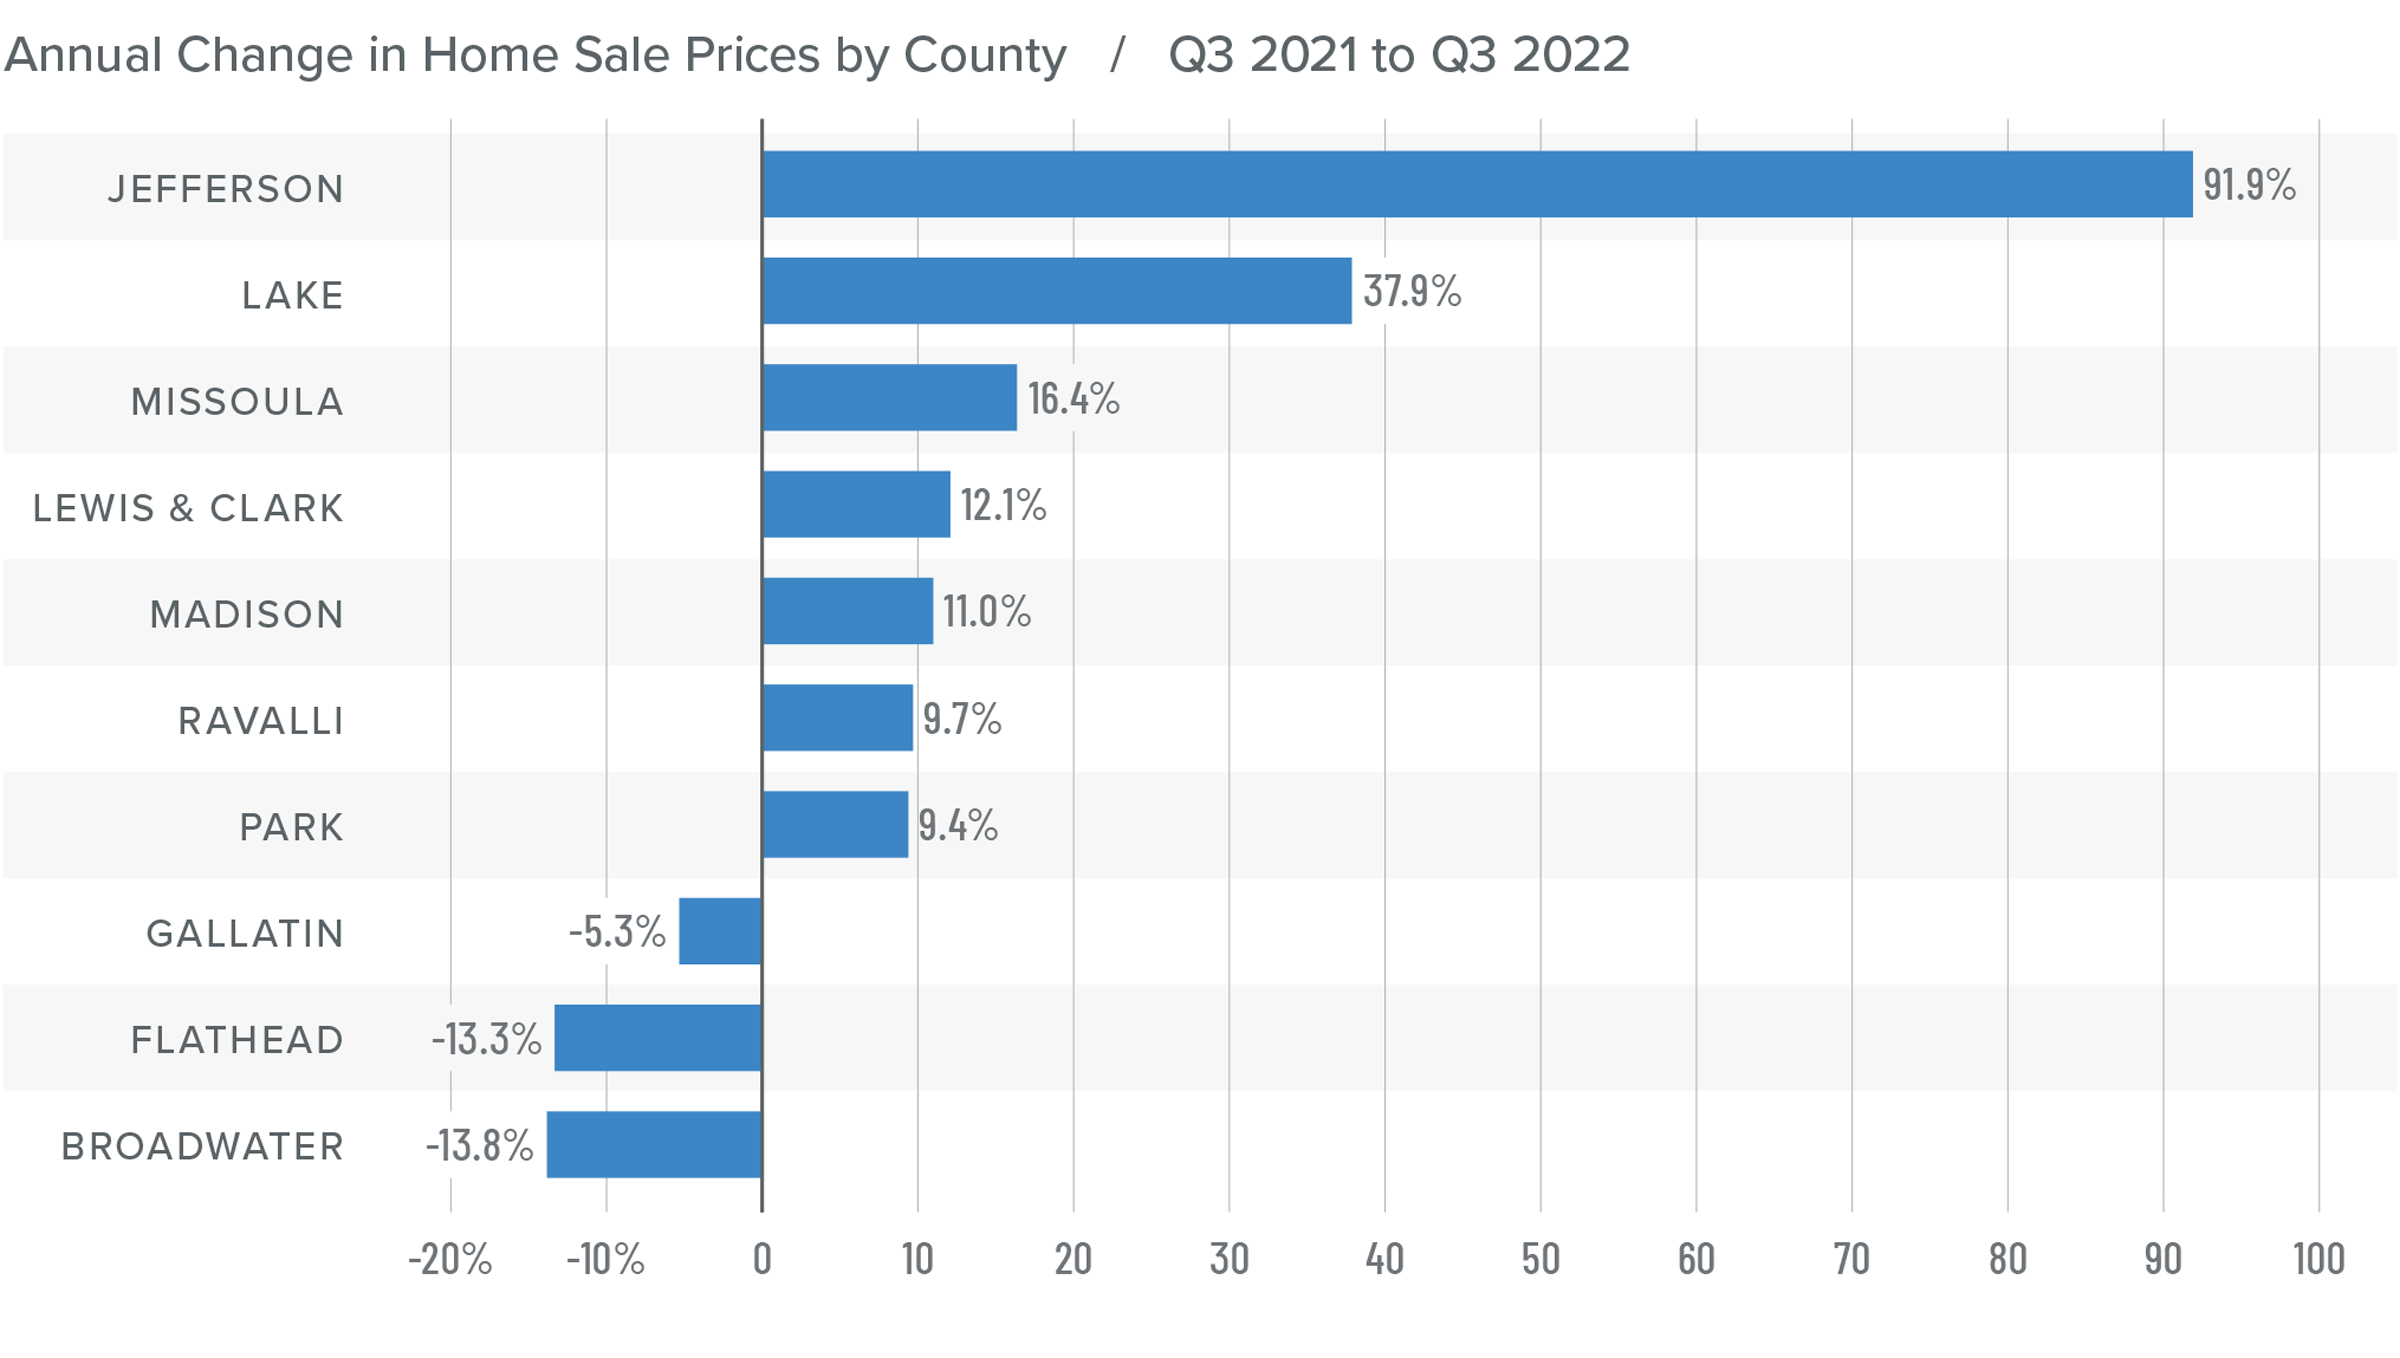 A bar graph showing the annual change in home sale prices for various counties in Montana from Q3 2021 to Q3 2022. Jefferson County tops the list at 91.9%, followed by Lake at 37.9%, Missoula at 16.4%, Lewis & Clark at 12.1%, Madison 11%, Ravalli 9.7%, Park 9.4%, Gallatin -5.3%, Flathead -13.3%, and Broadwater at -13.8%.